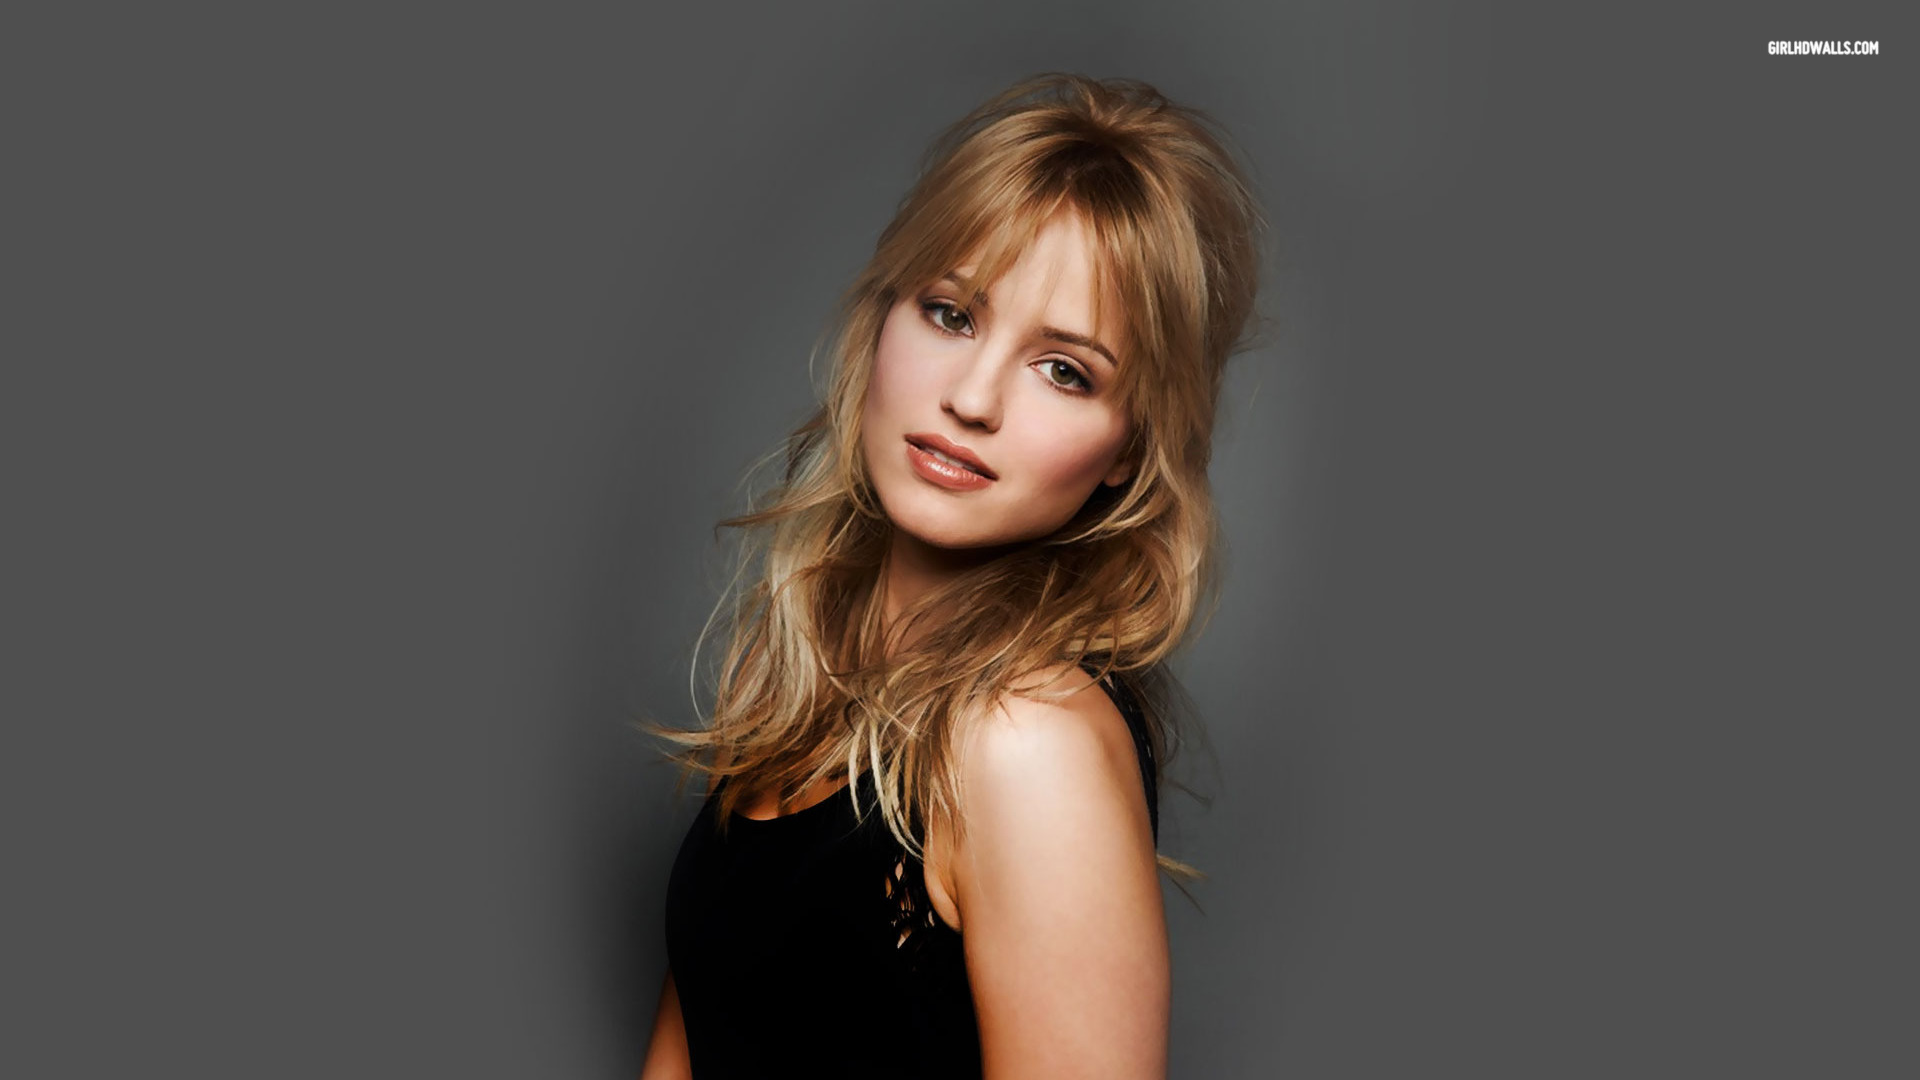 dianna agron wallpaper,hair,face,hairstyle,blond,beauty